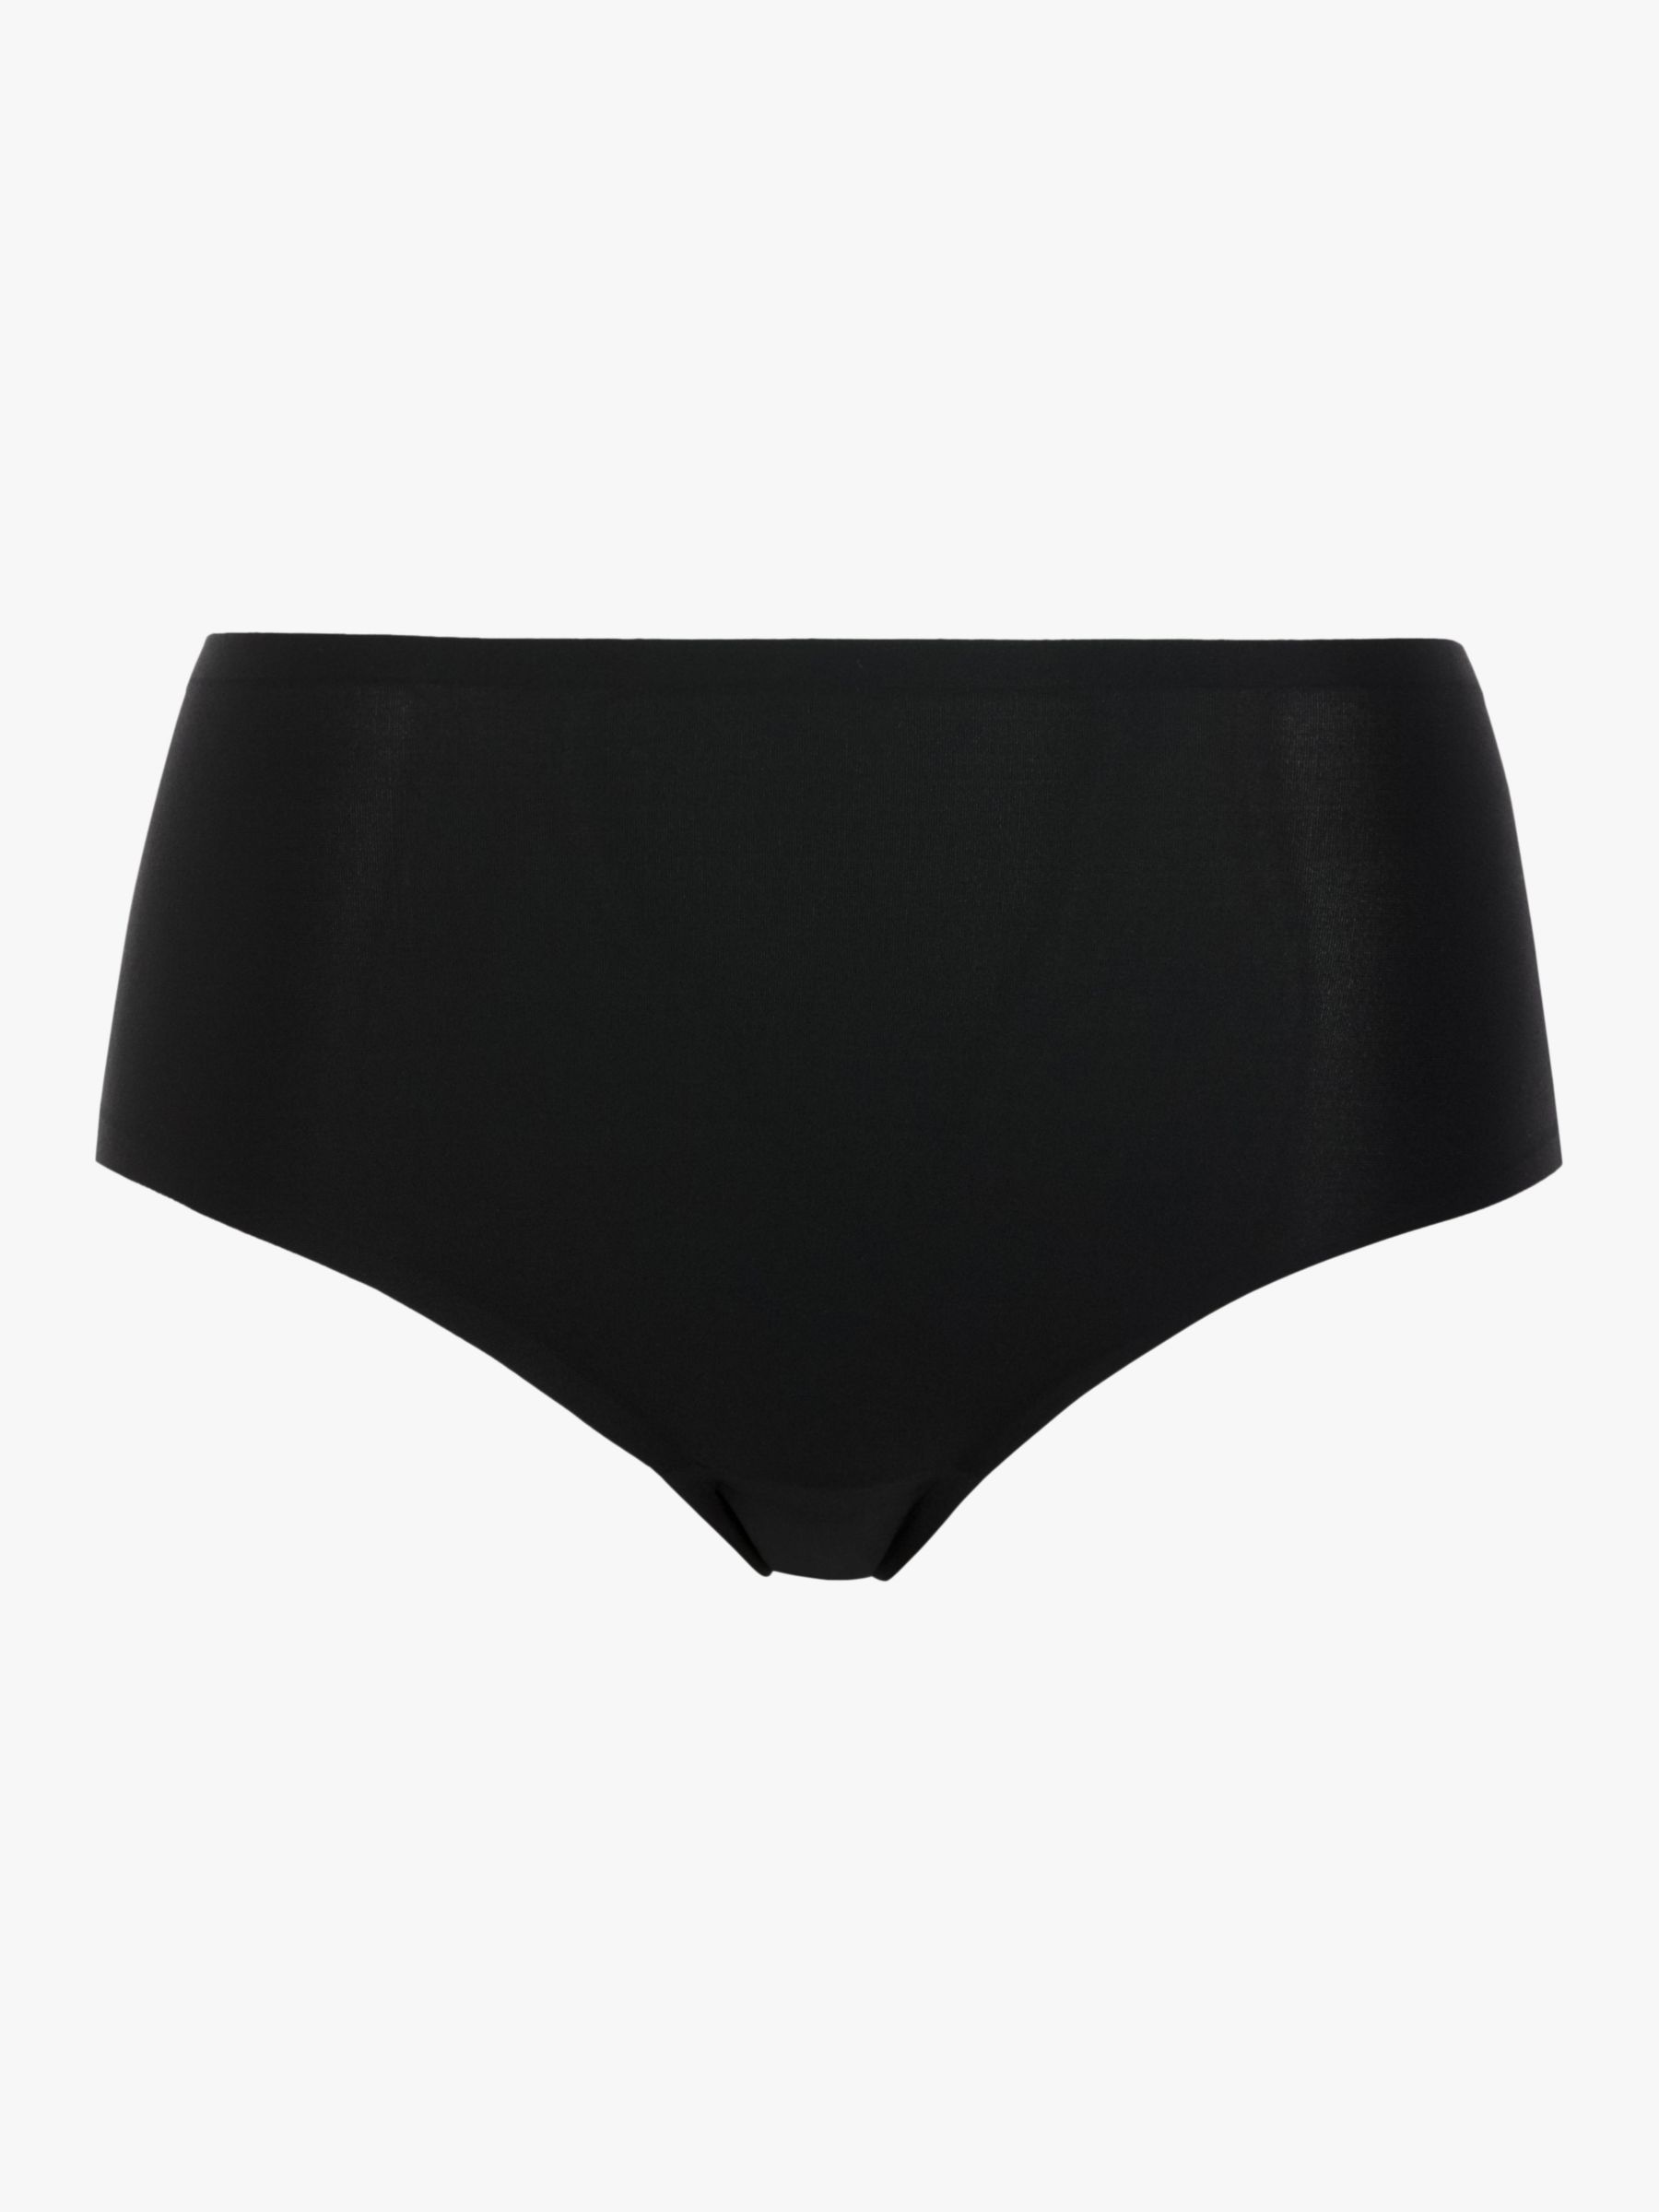 Buy Chantelle Soft Stretch High Waist String Knickers Online at johnlewis.com